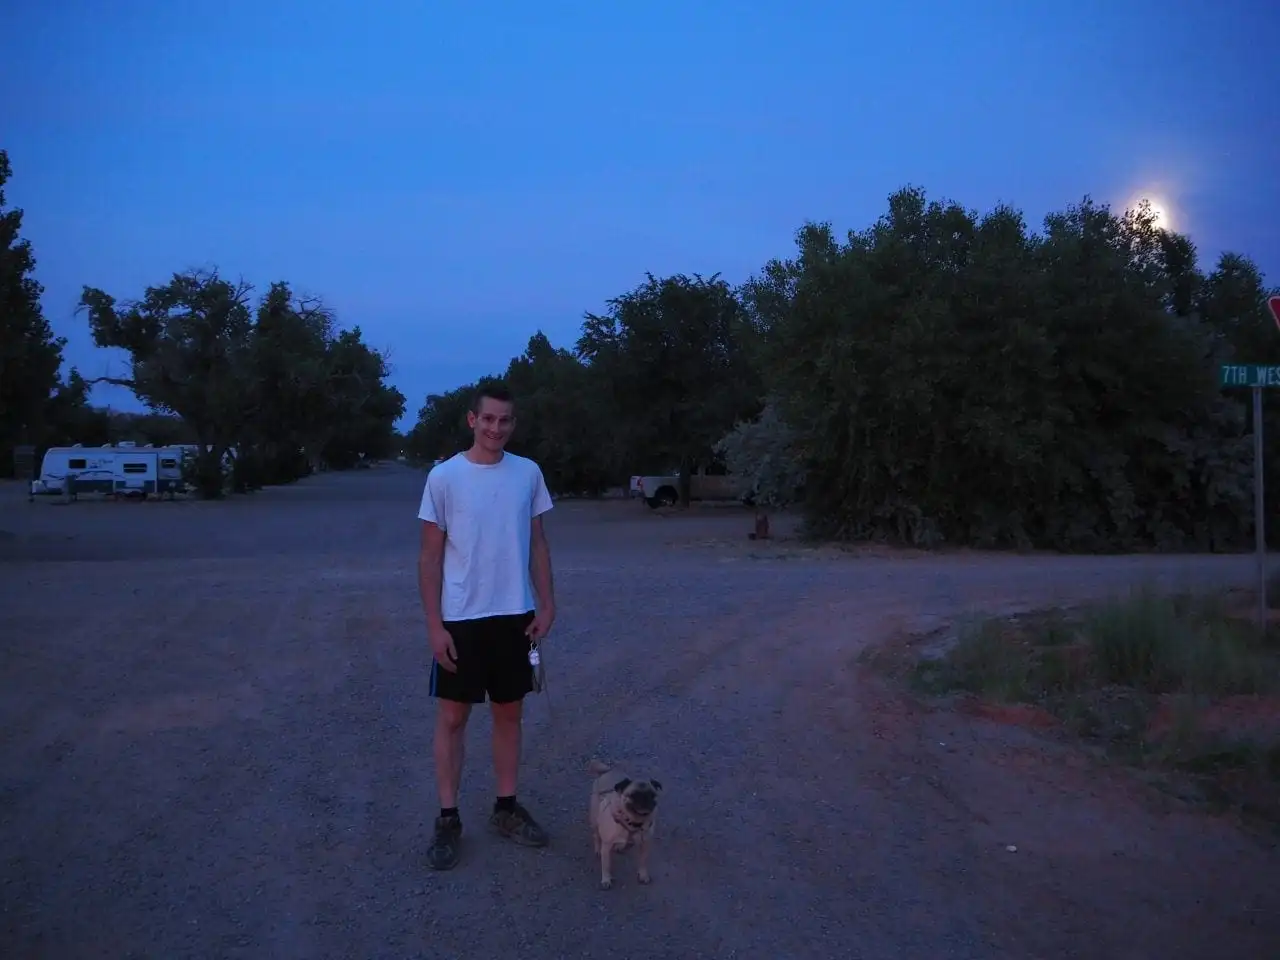 Keith and Lexi on an evening stroll through the campground